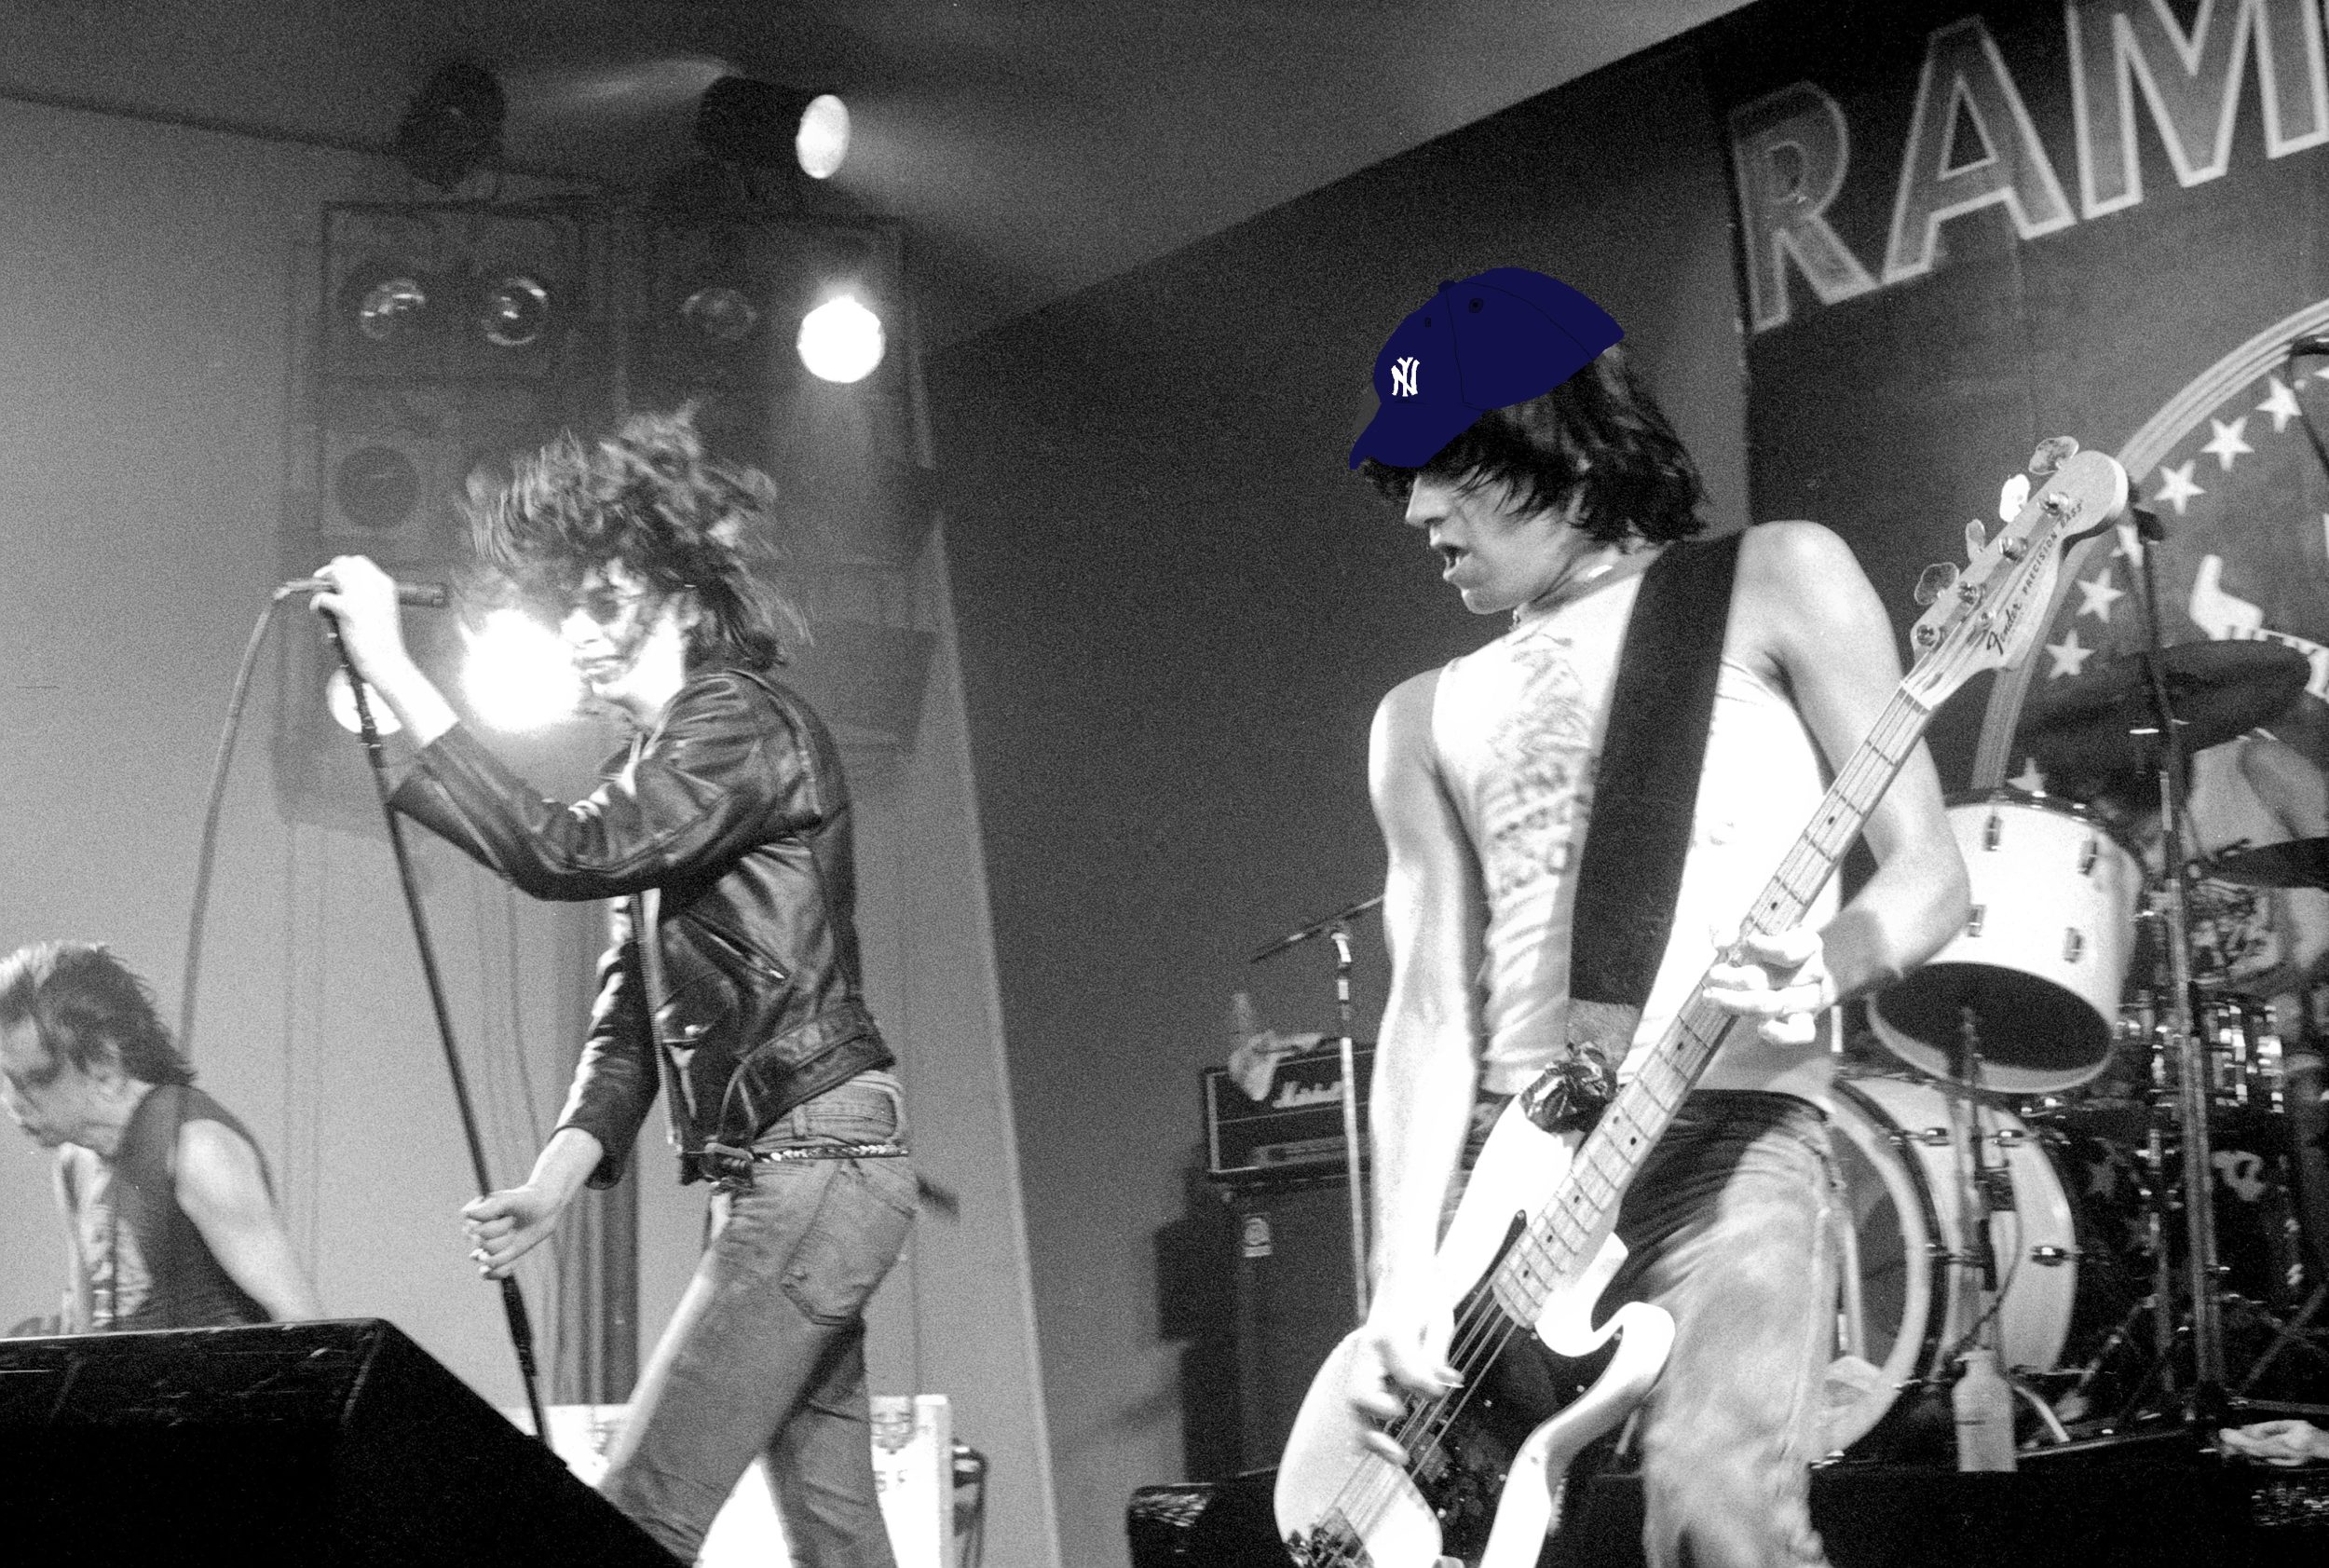 Ramones jam out in Germany.